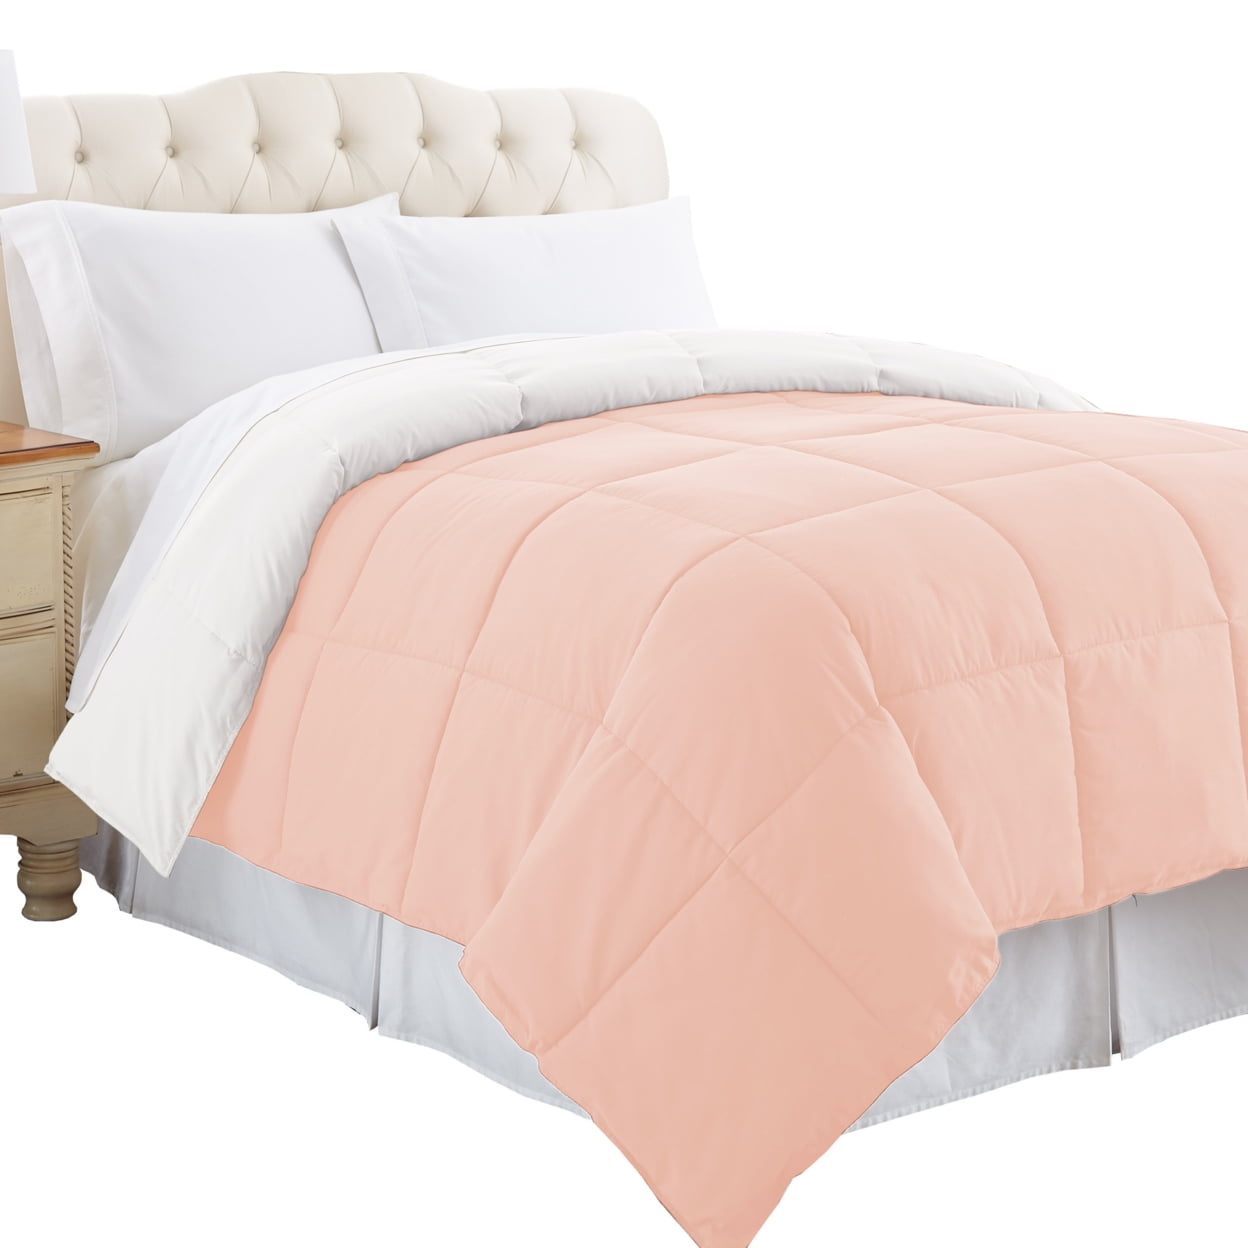 Bm202047 Genoa Queen Size Box Quilted Reversible Comforter, White & Pink